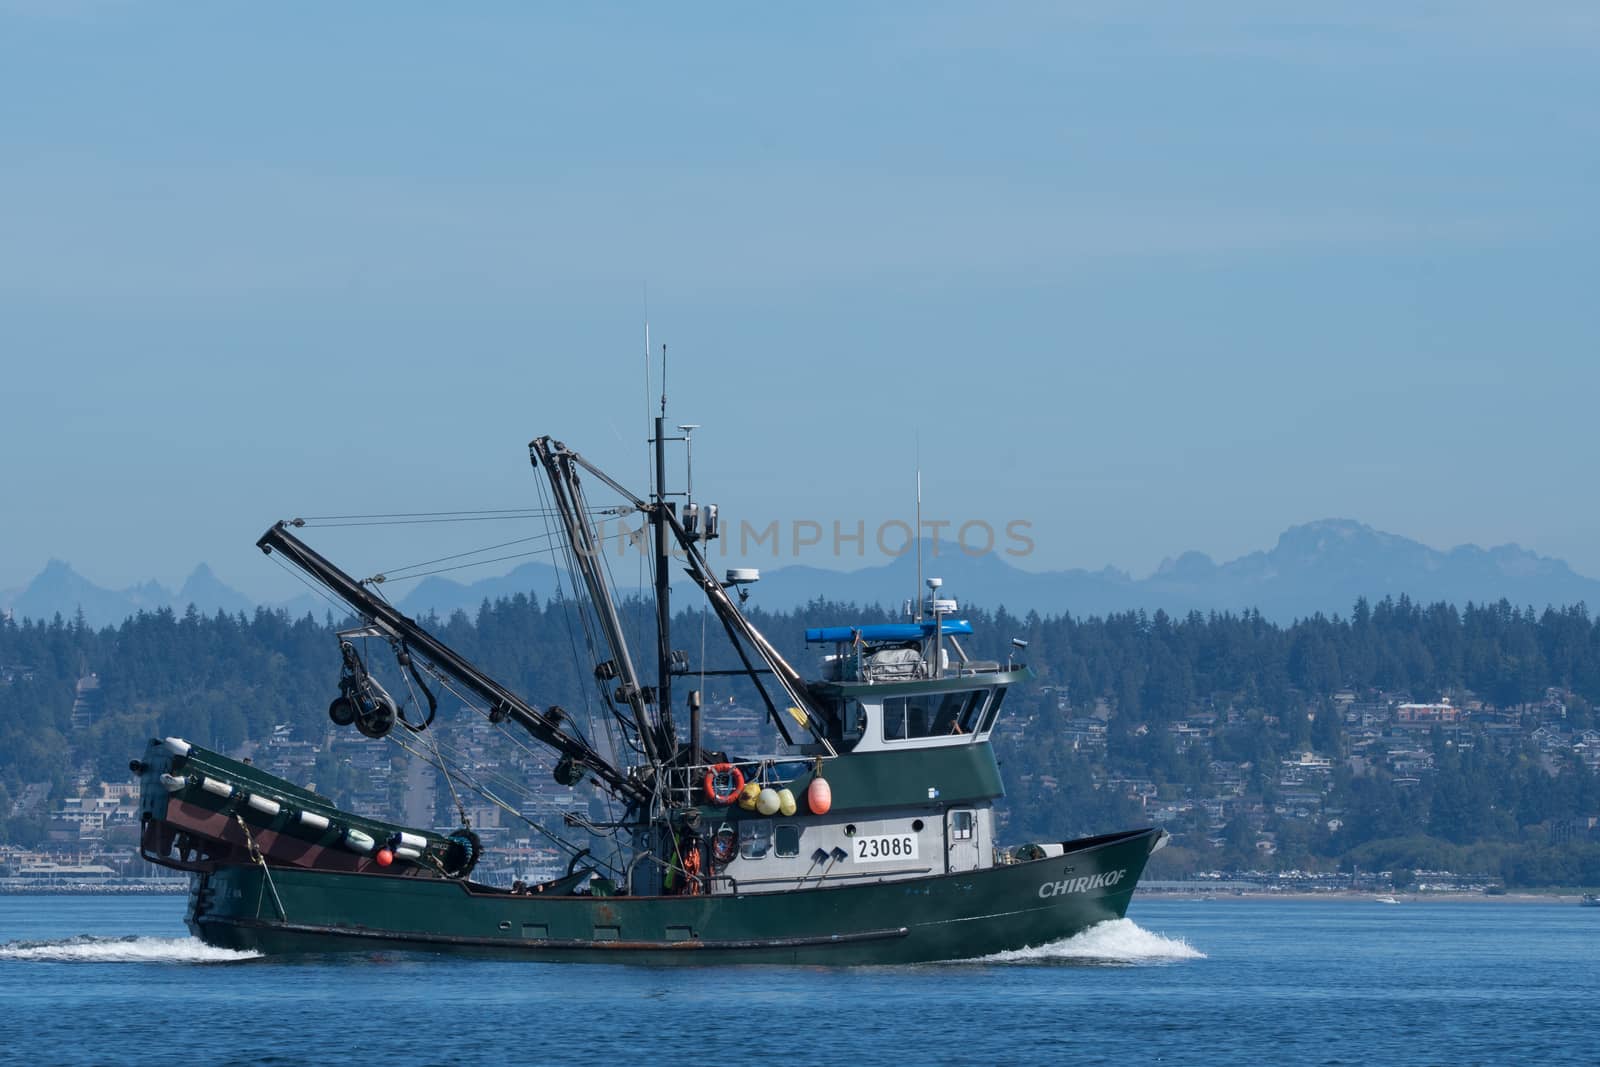 F/V Chirikof returning to Seattle from its latest trip to the fishing grounds.